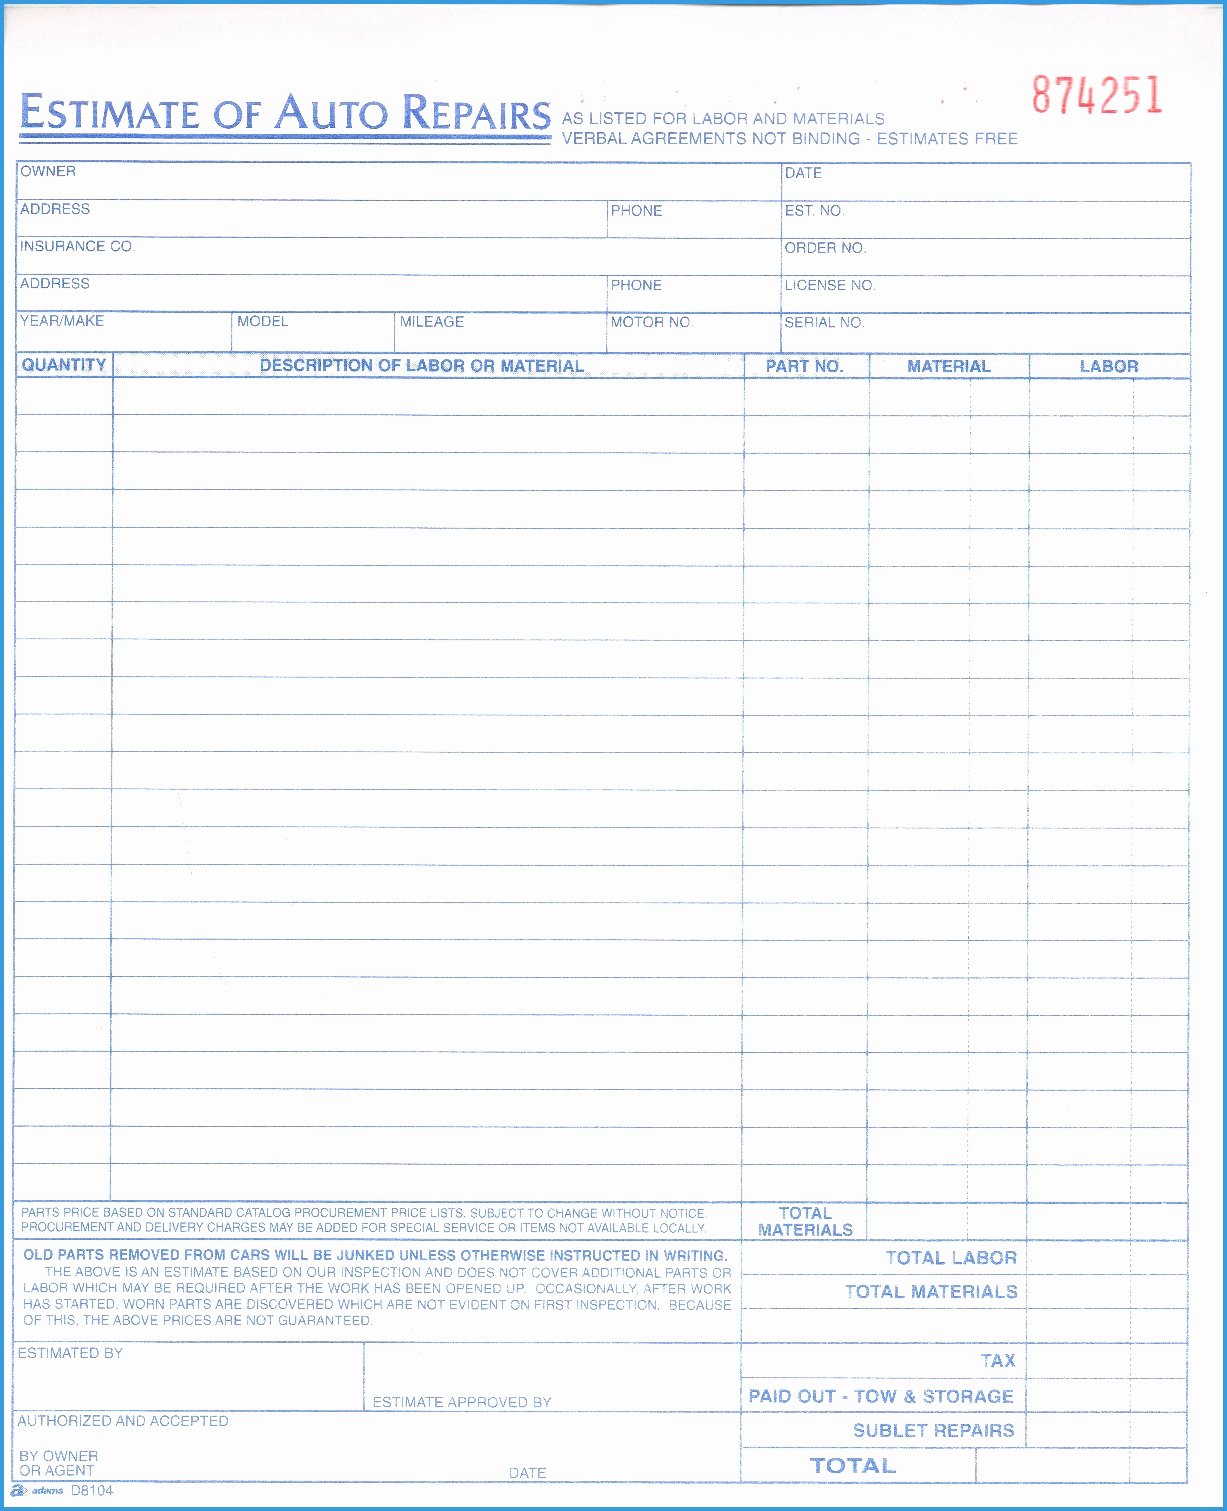 Auto Repair Estimate Template Excel Awesome Auto Estimate Template Sample Worksheets Mechanic form